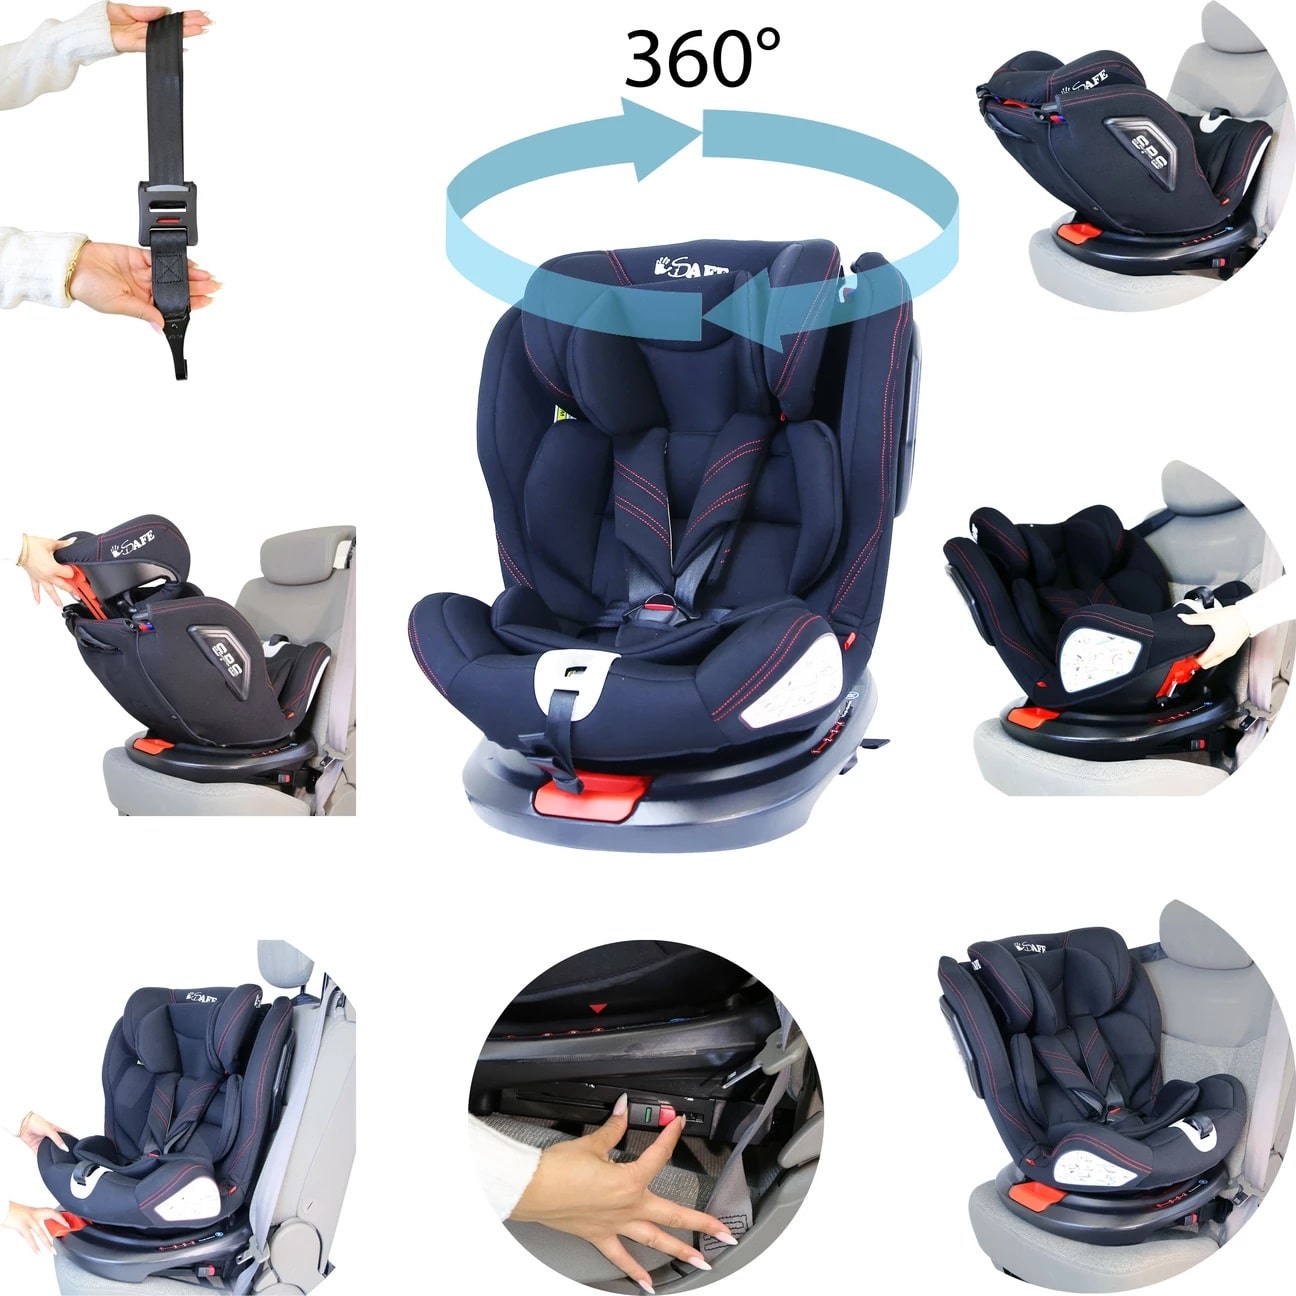 baby toilet seat uae Isafe all stages 360° rotating baby car seat group 0+ 1 2 3 (black)